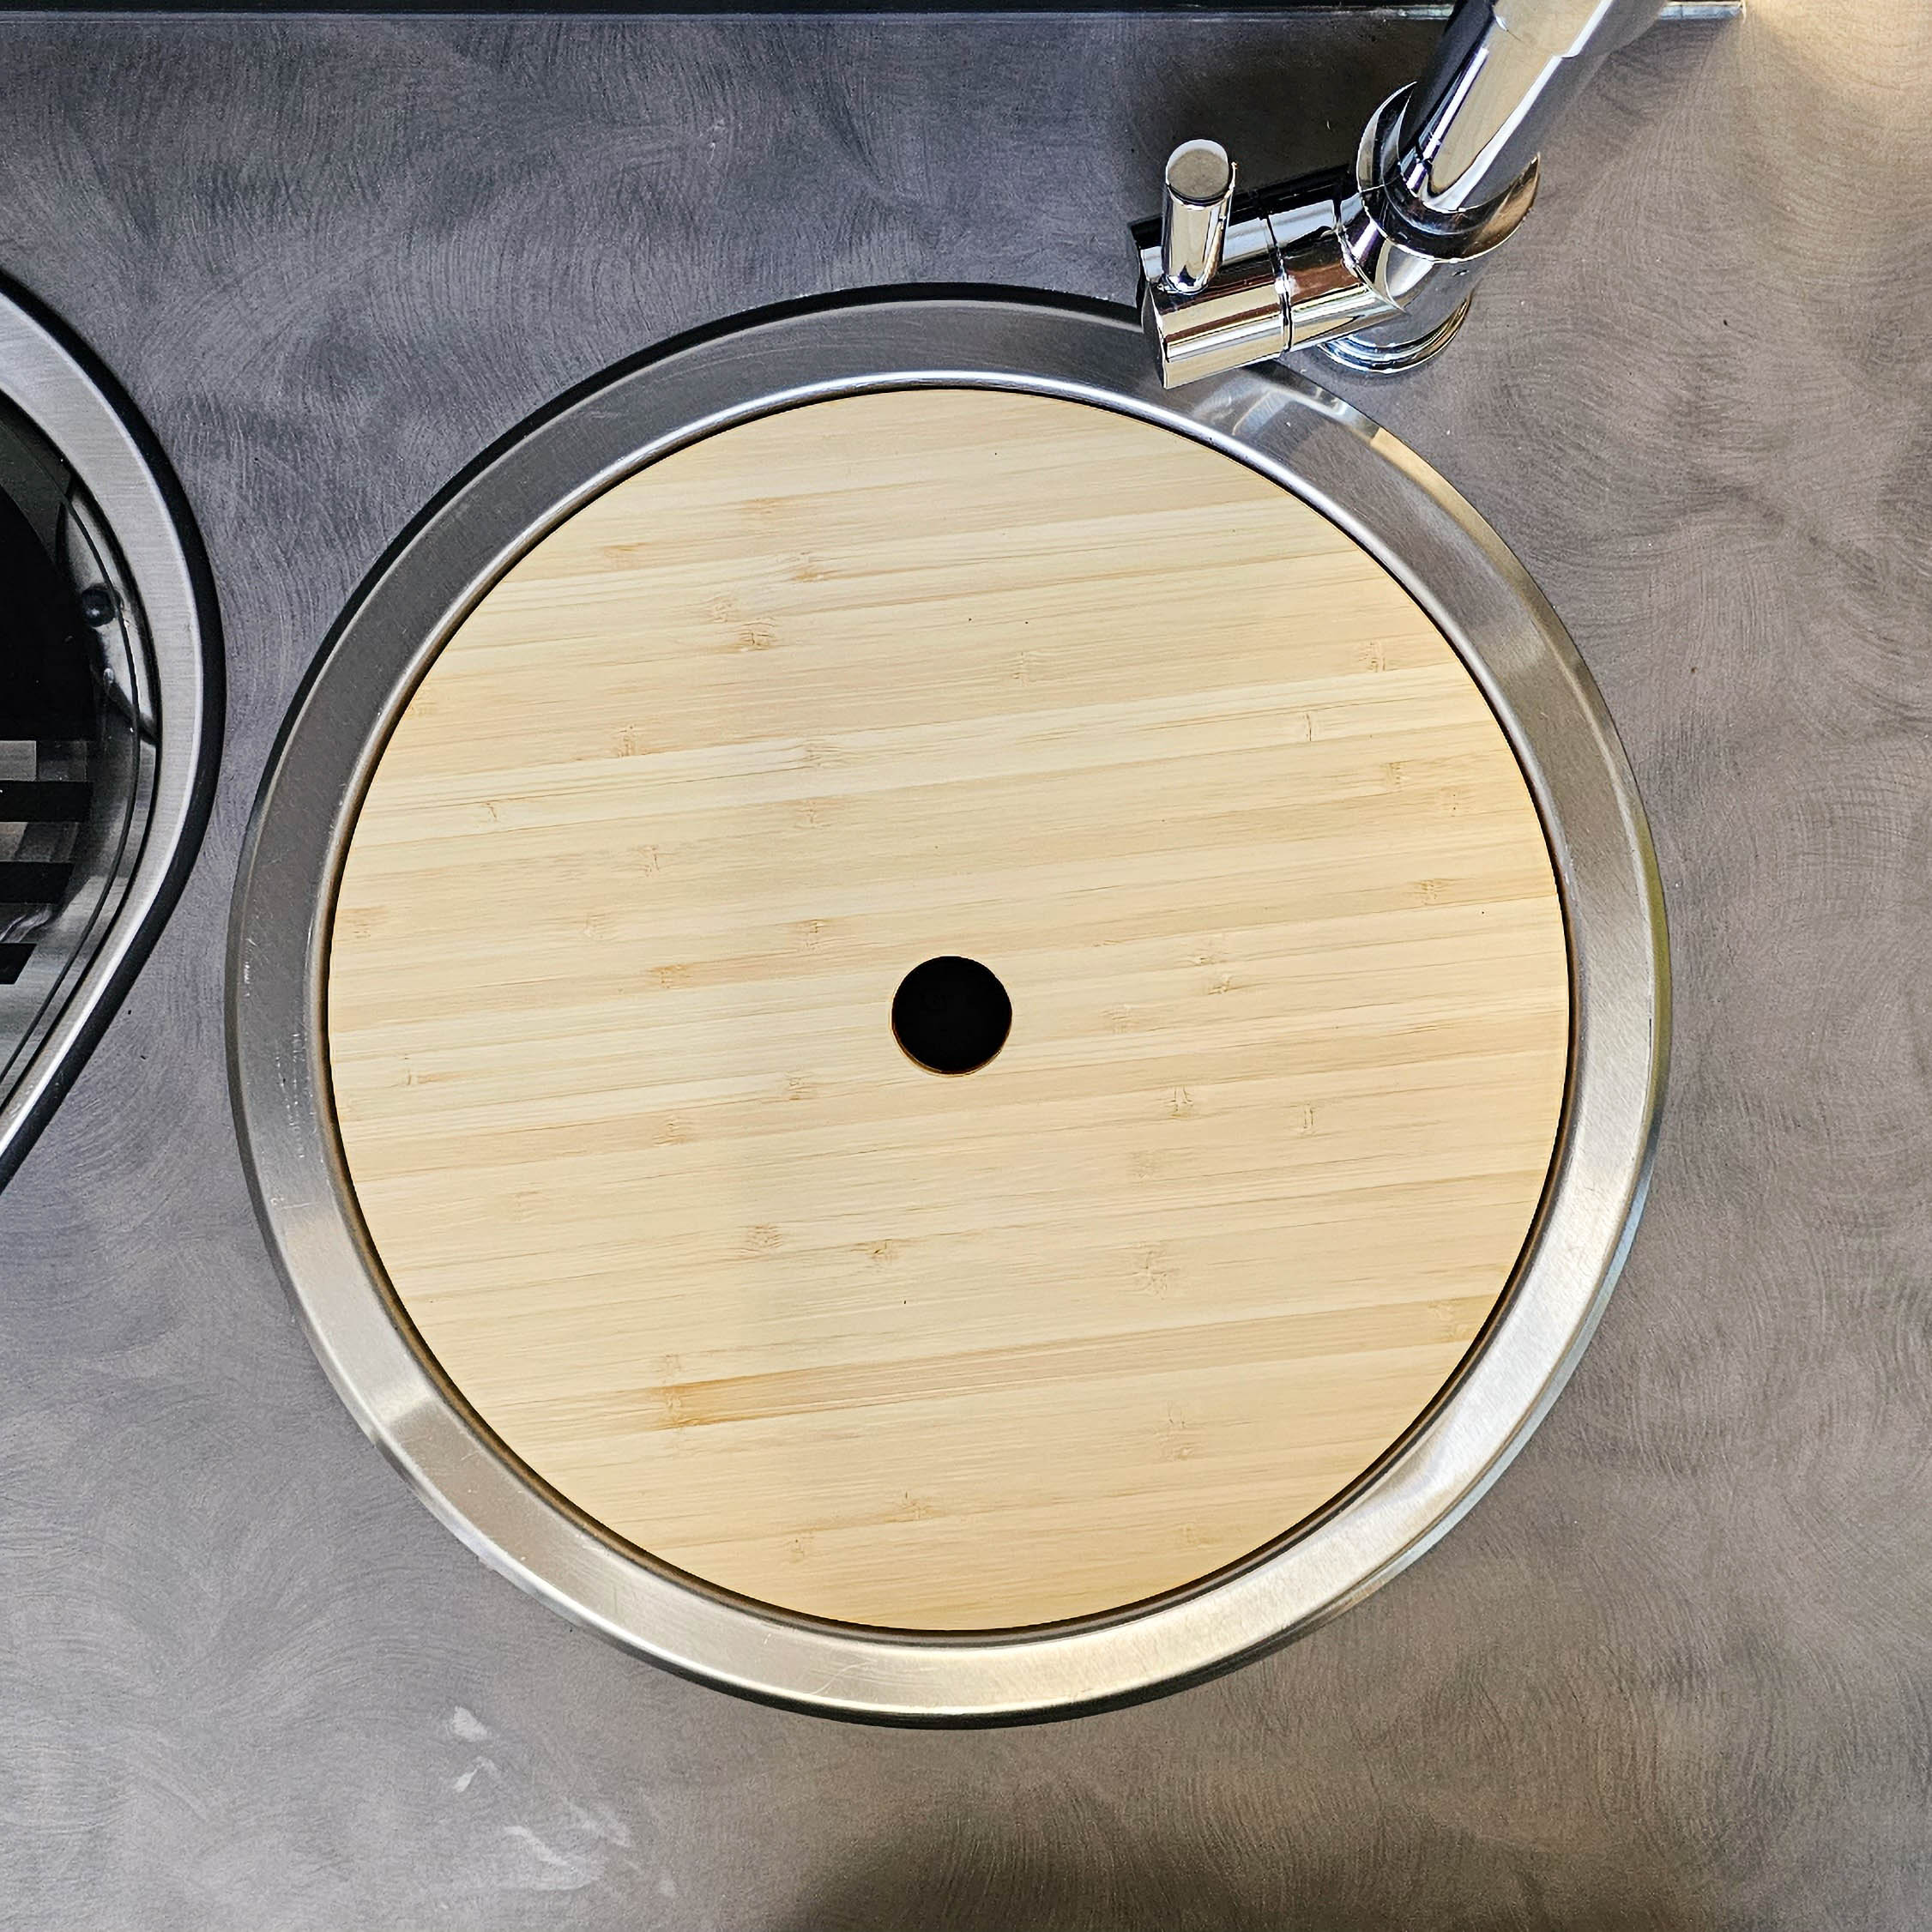 Cutting board with sink cover for Challenger